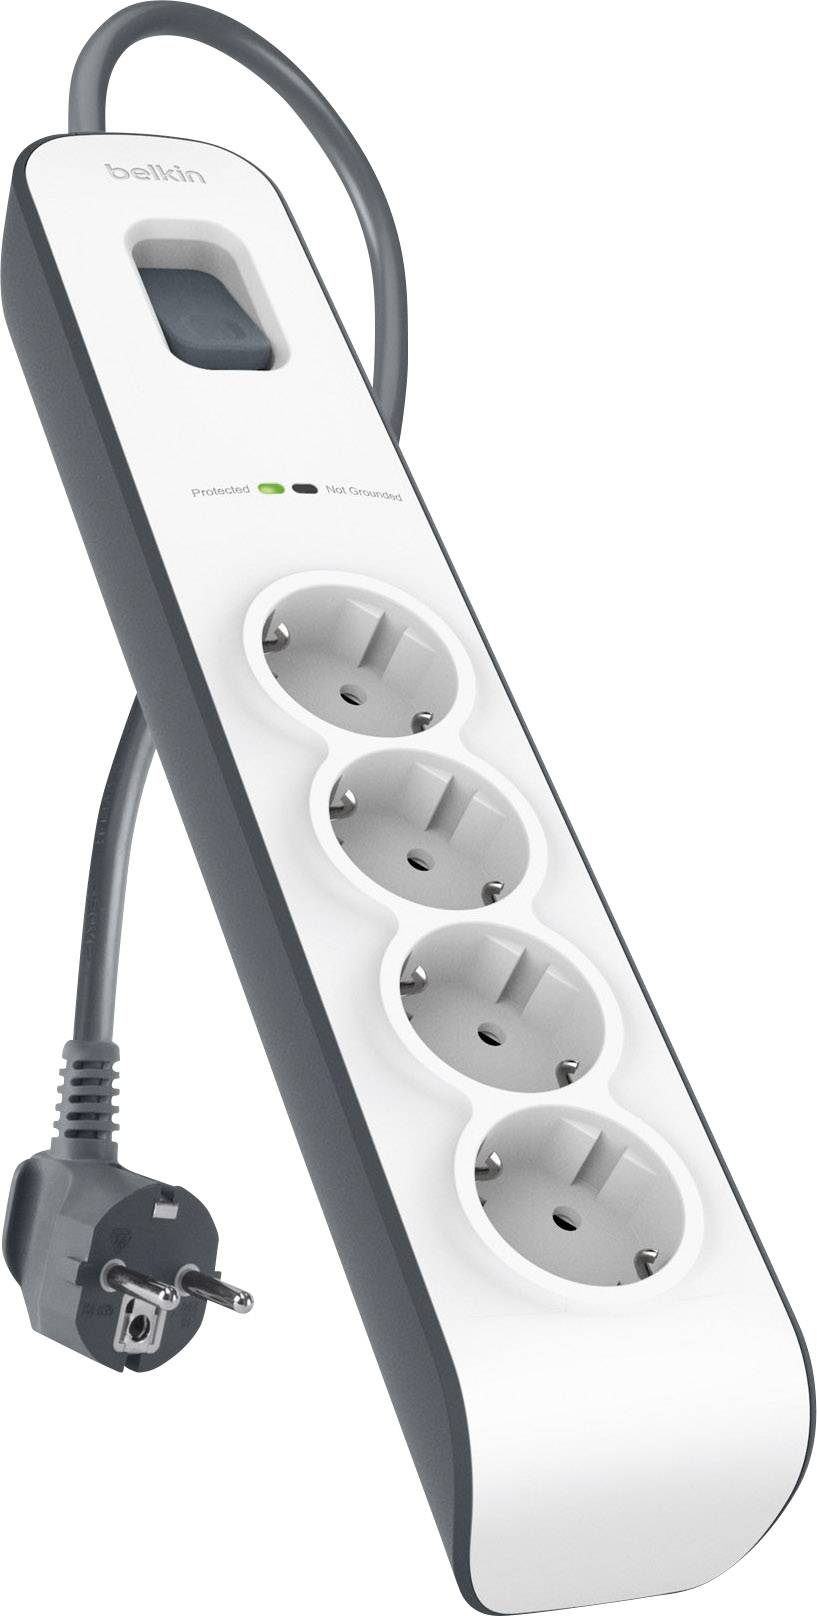 Belkin - Surge Protector - Output Connectors: 4 - Germany